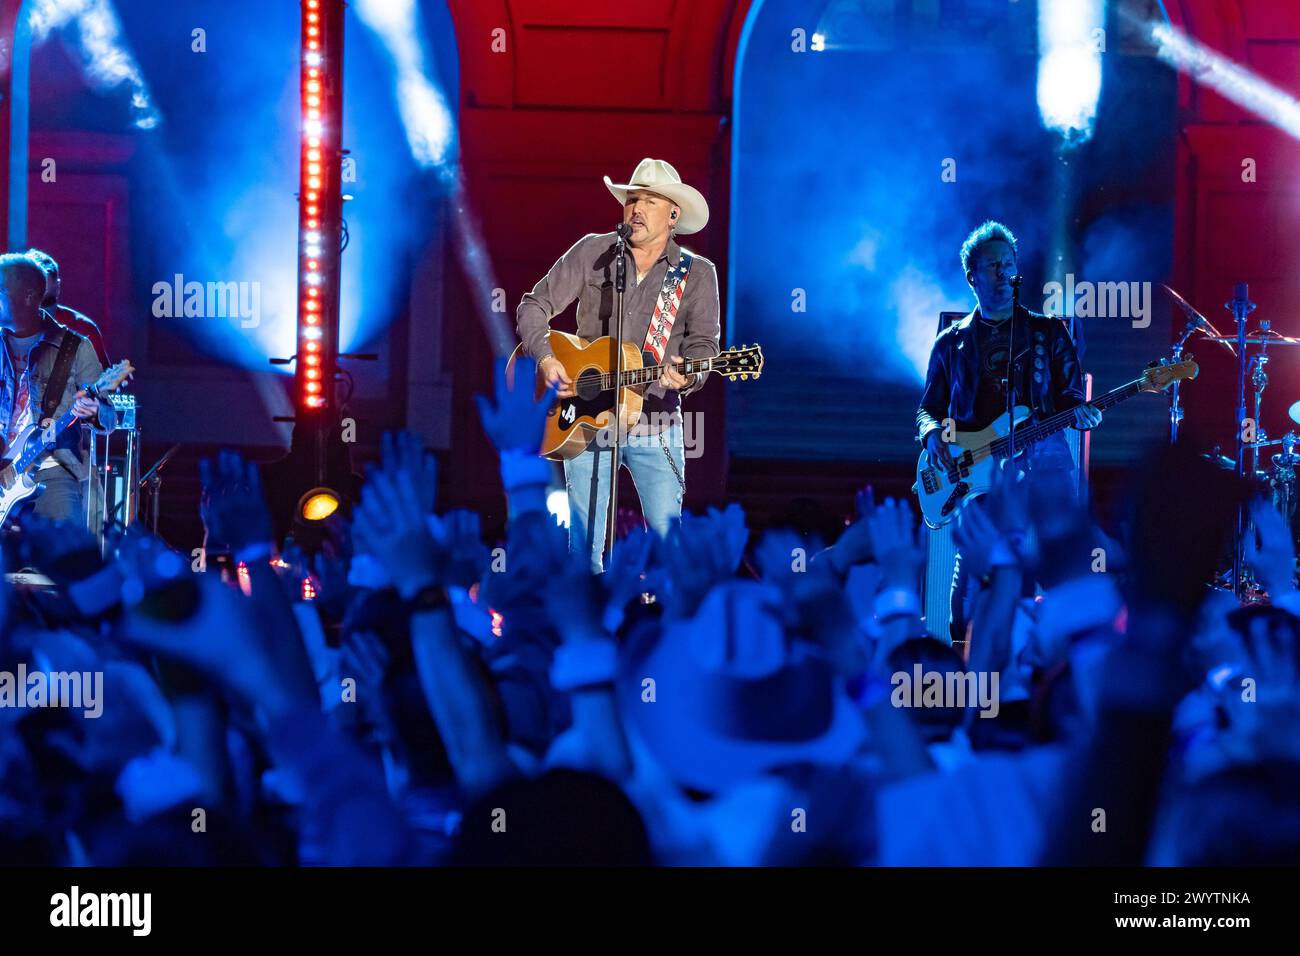 AUSTIN, TEXAS - APRIL 07: In this image released on April 07, 2024, Jason Aldean performs on the 2024 CMT Music Awards stage on April 3, 2024, at the University of Texas at Austin in Austin, Texas.  (Photo by Amy Price/ImageSPACE) Stock Photo